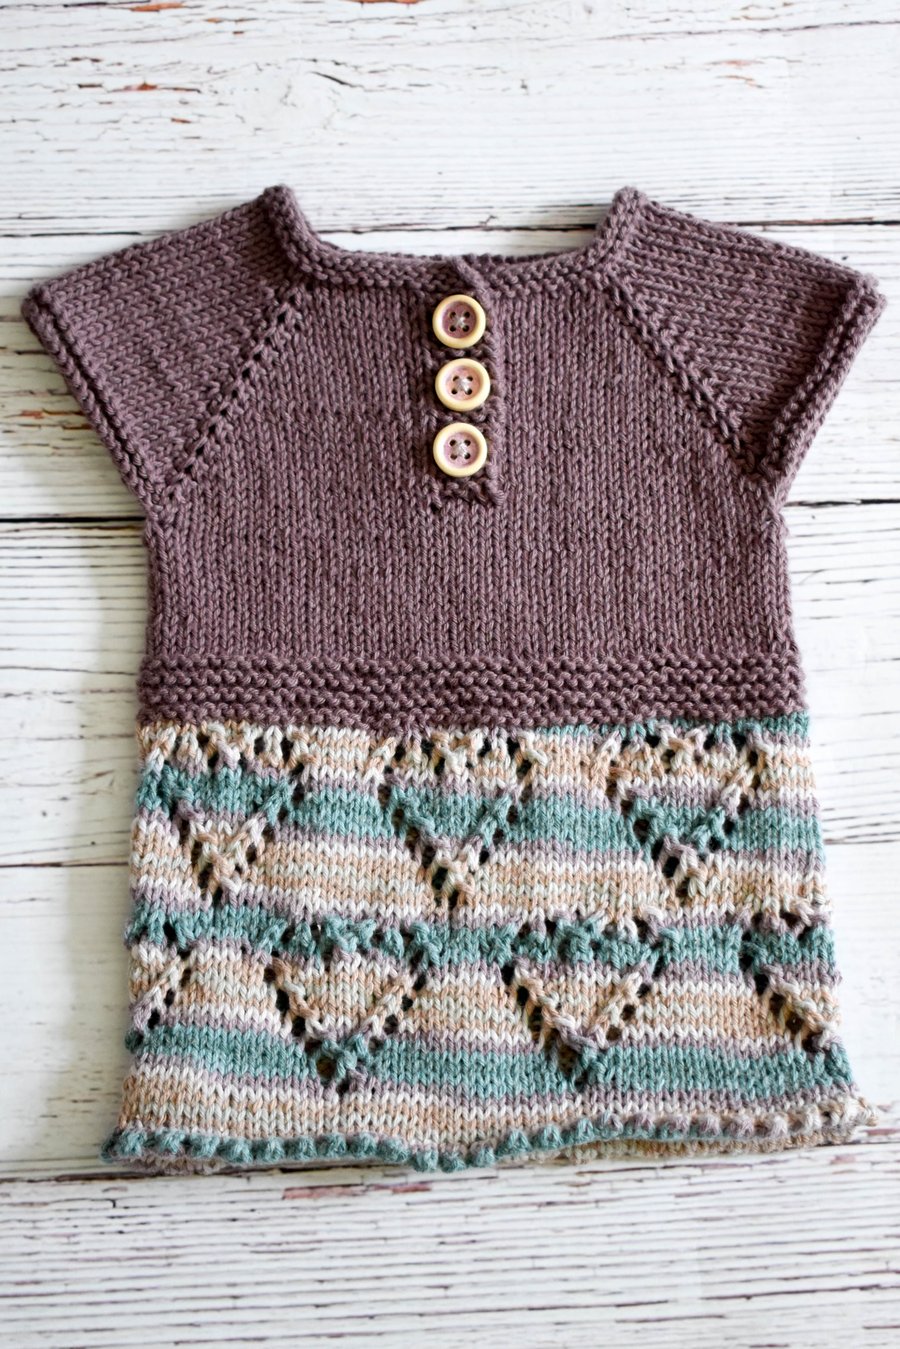 Hand Knitted heart pattern summer dress in Mauve and teal - Newborn